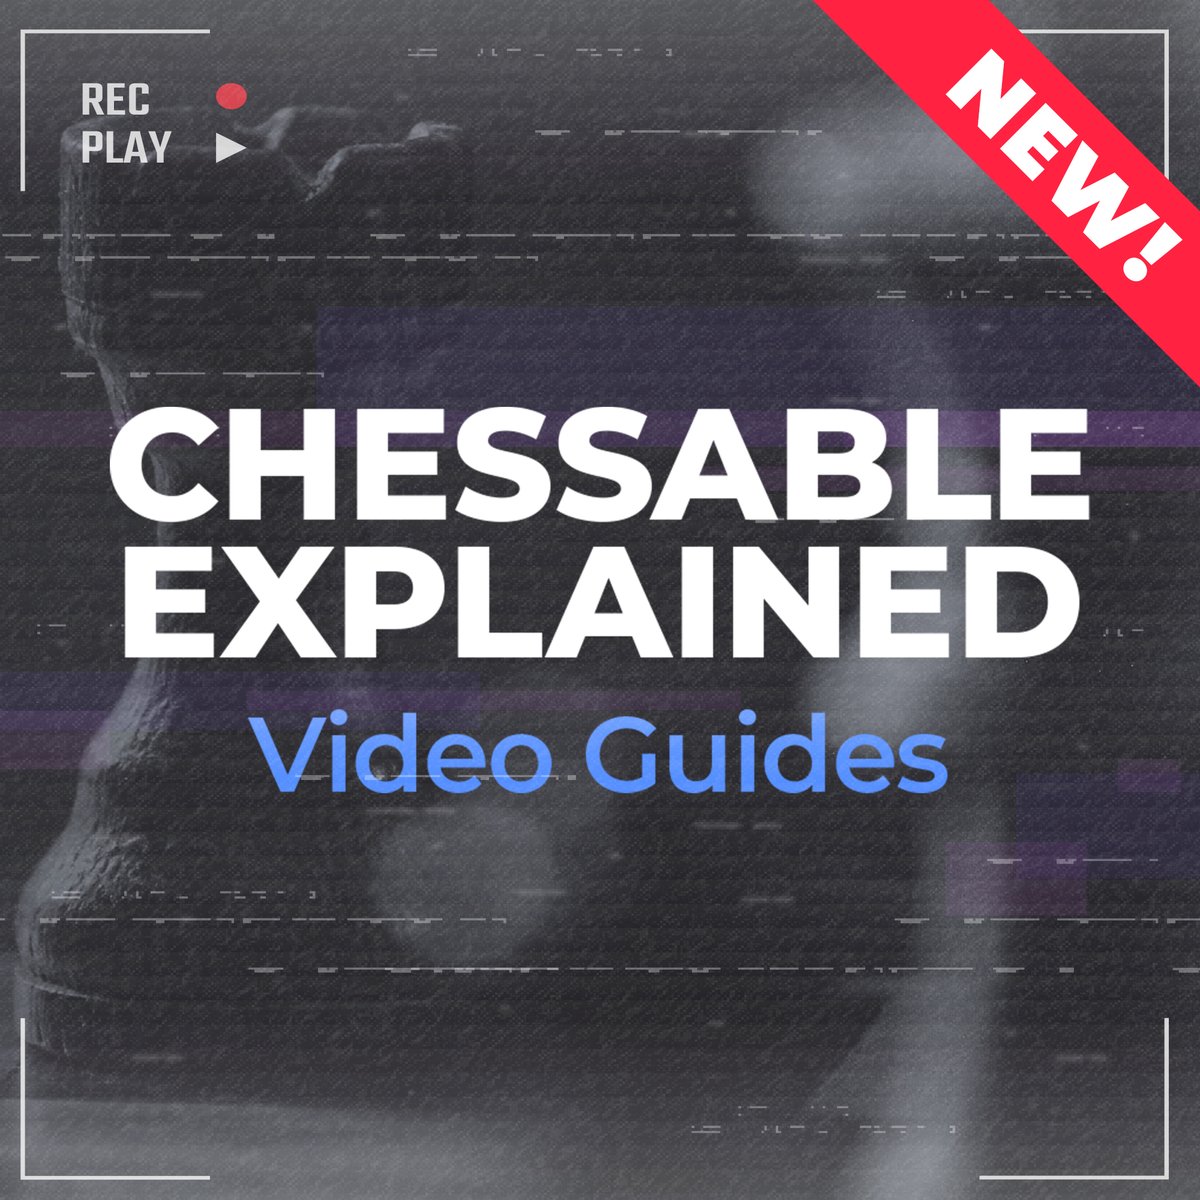 We have a new series of free videos to help you get the most out of Chessable! They're packed full of tips and tricks on how to maximise your chess training - check them out here: chessable.com/explained